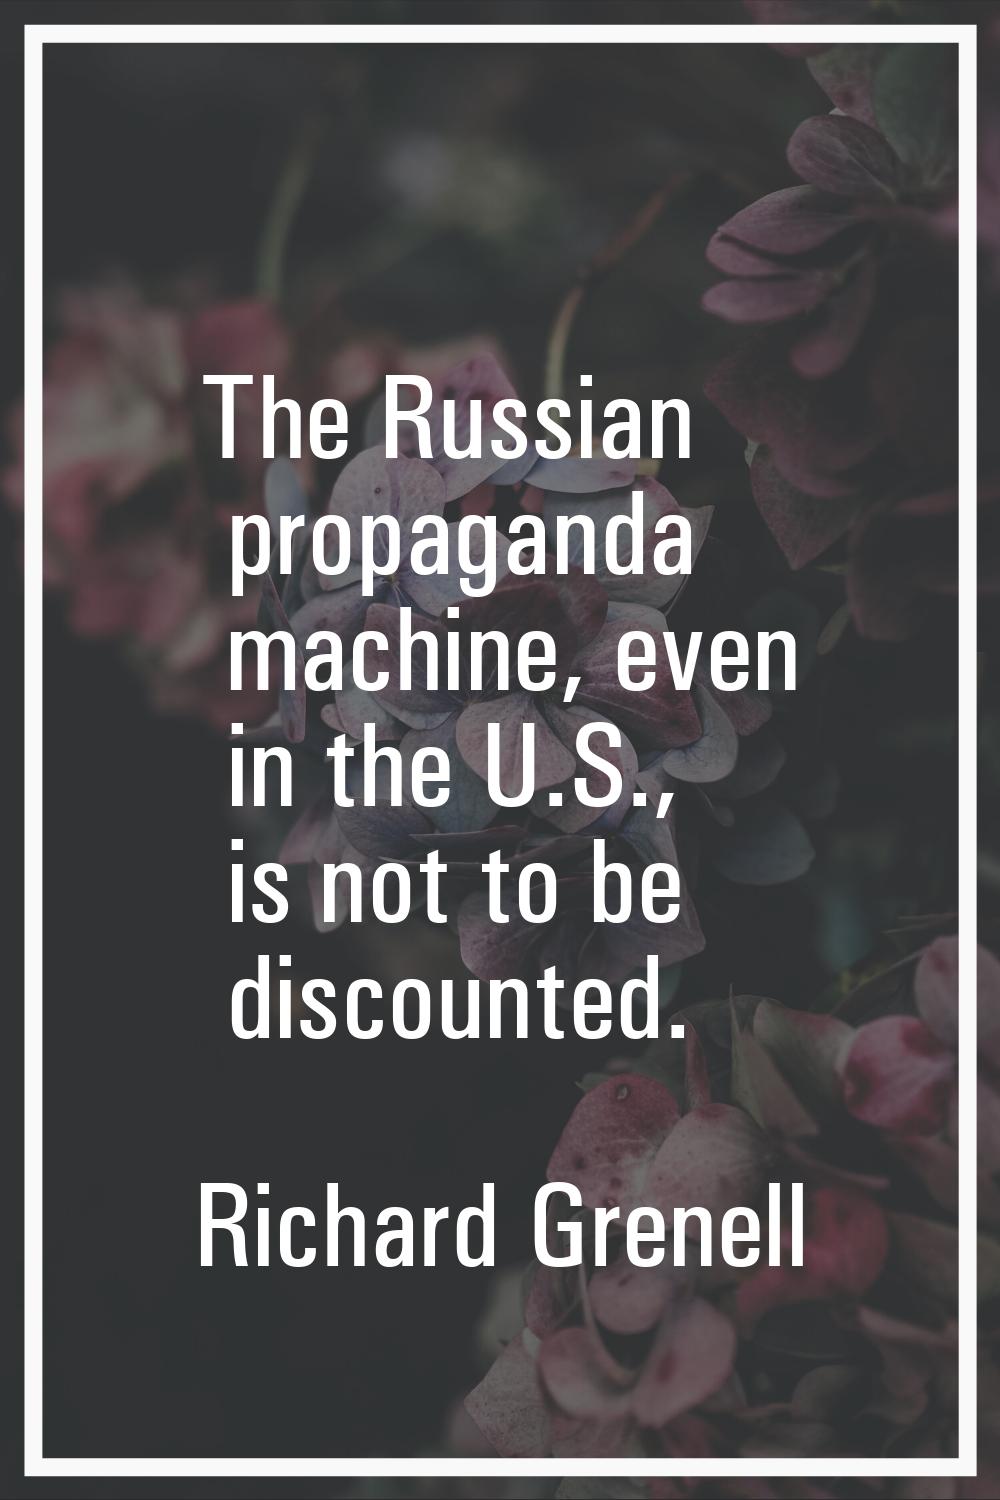 The Russian propaganda machine, even in the U.S., is not to be discounted.